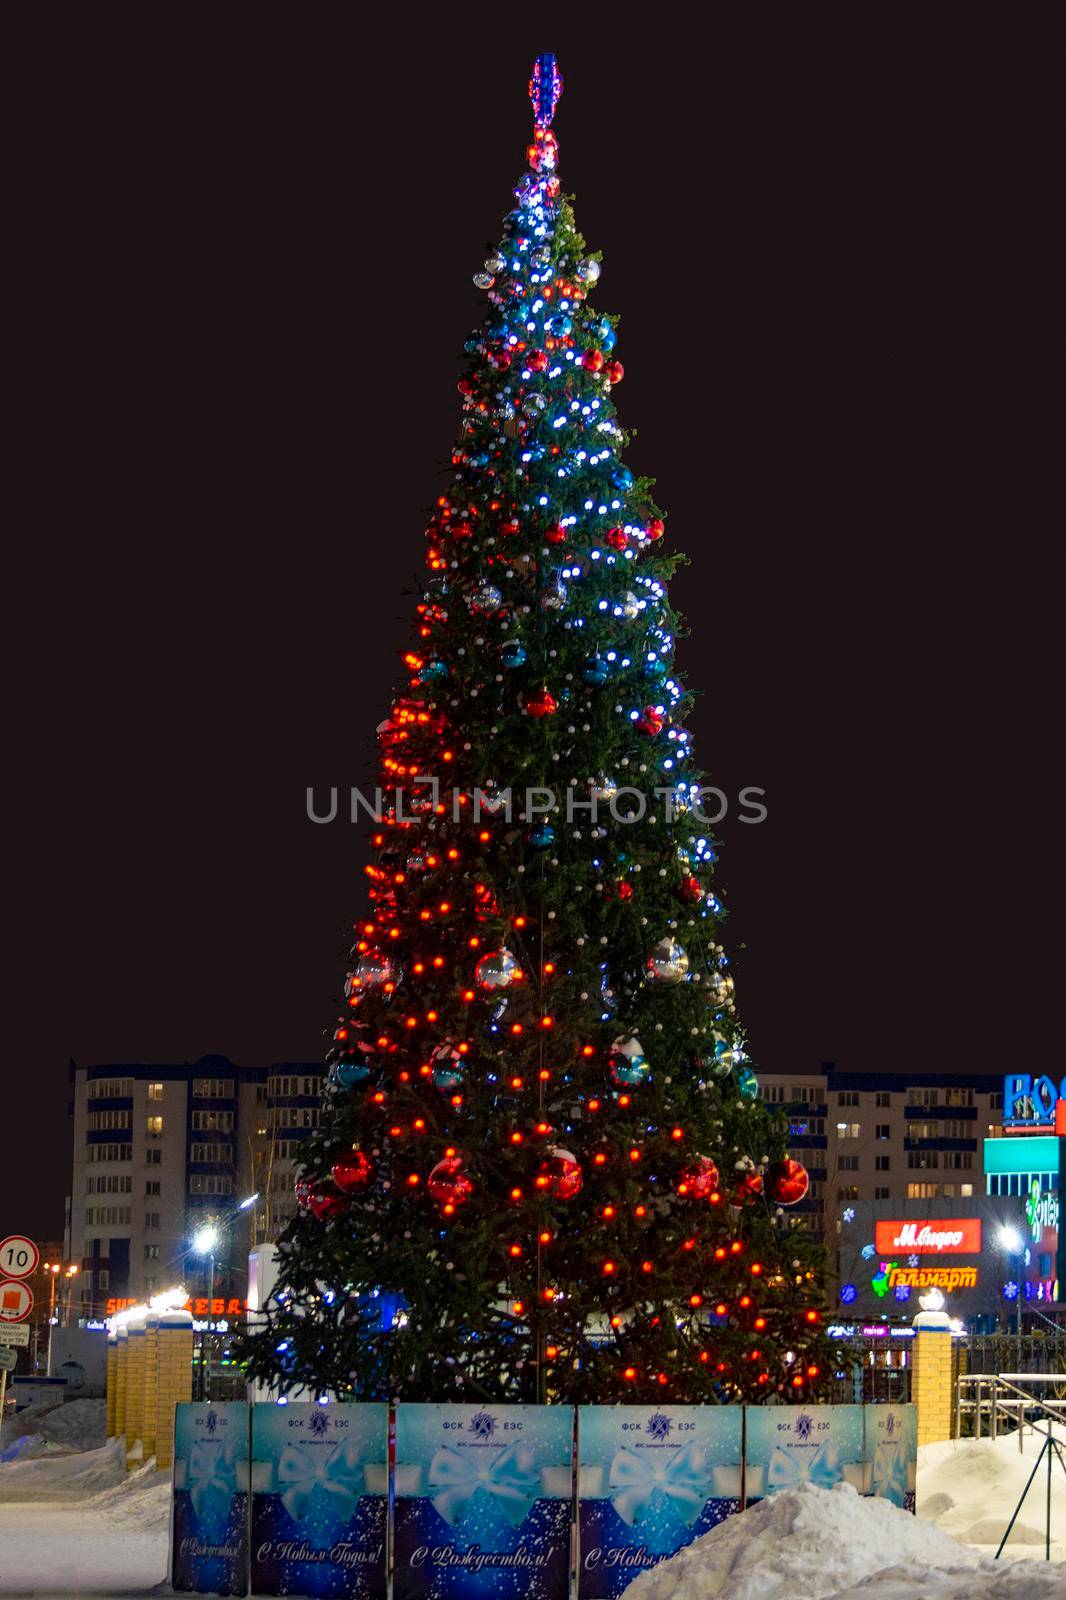 Christmas tree in winter. Surgut, Russia - 10 January, 2020 by Essffes